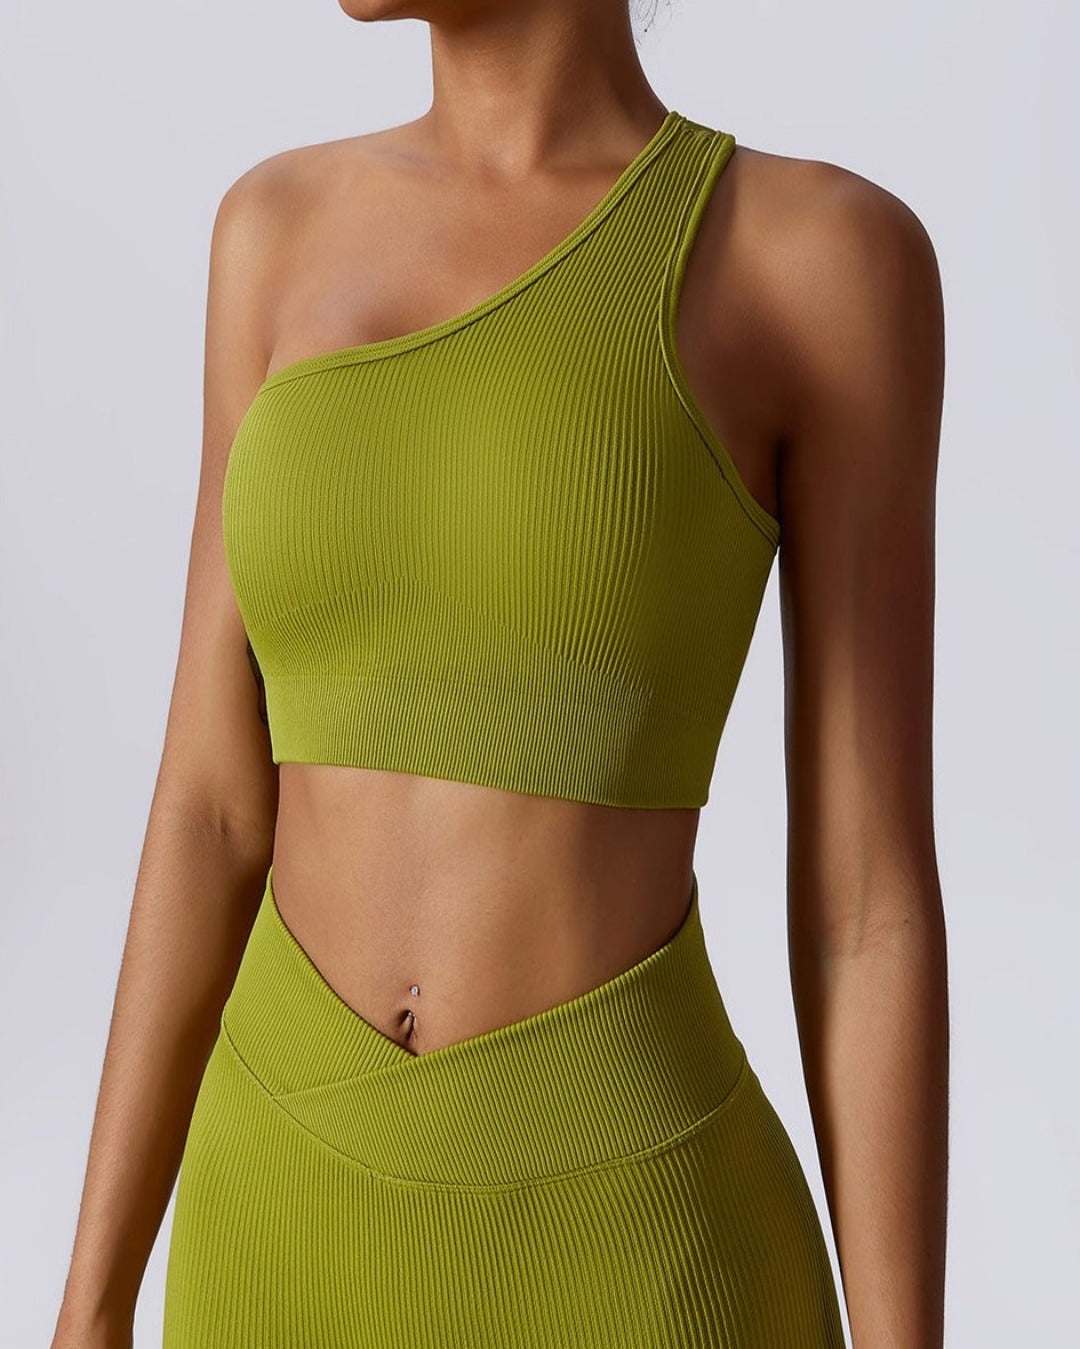 ONE STRAP CROP TOP - OLIVE GREEN